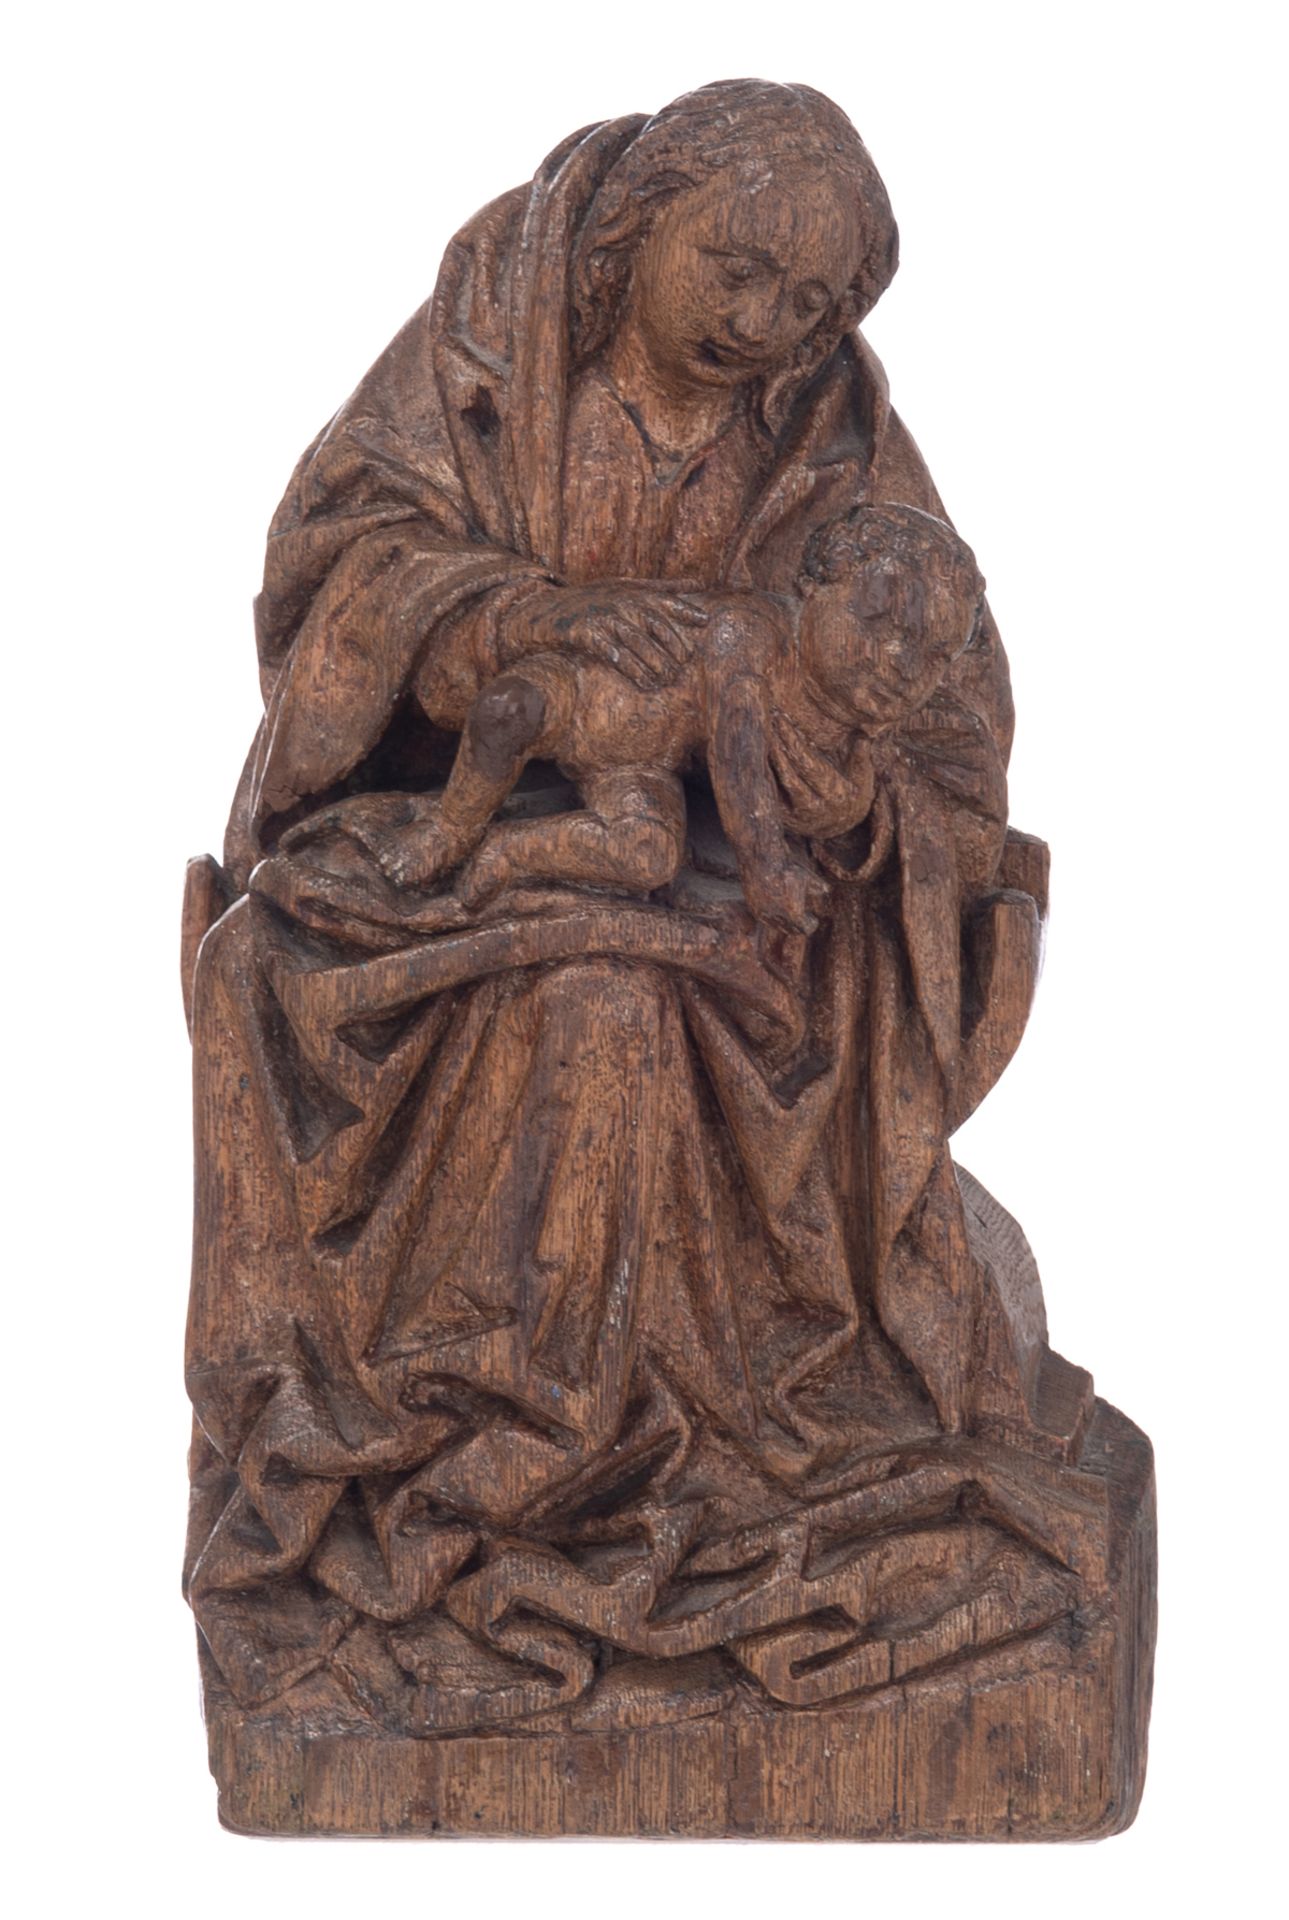 A very fine carved late 15th/early 16thC oak sculpture depicting the Holy Mother and Child, Southern